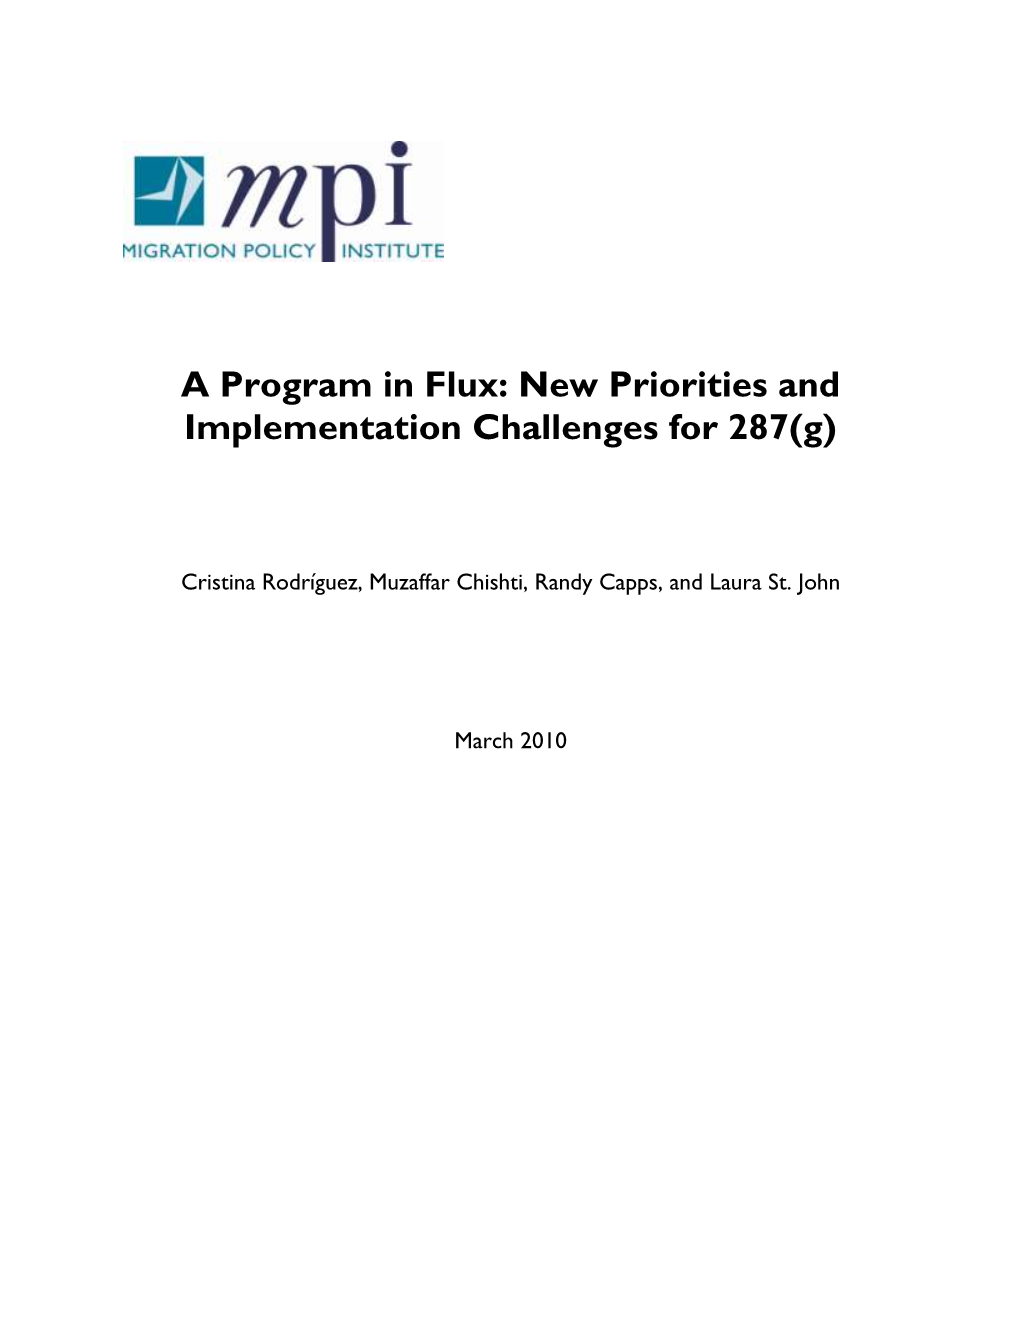 A Program in Flux: New Priorities and Implementation Challenges for 287(G)